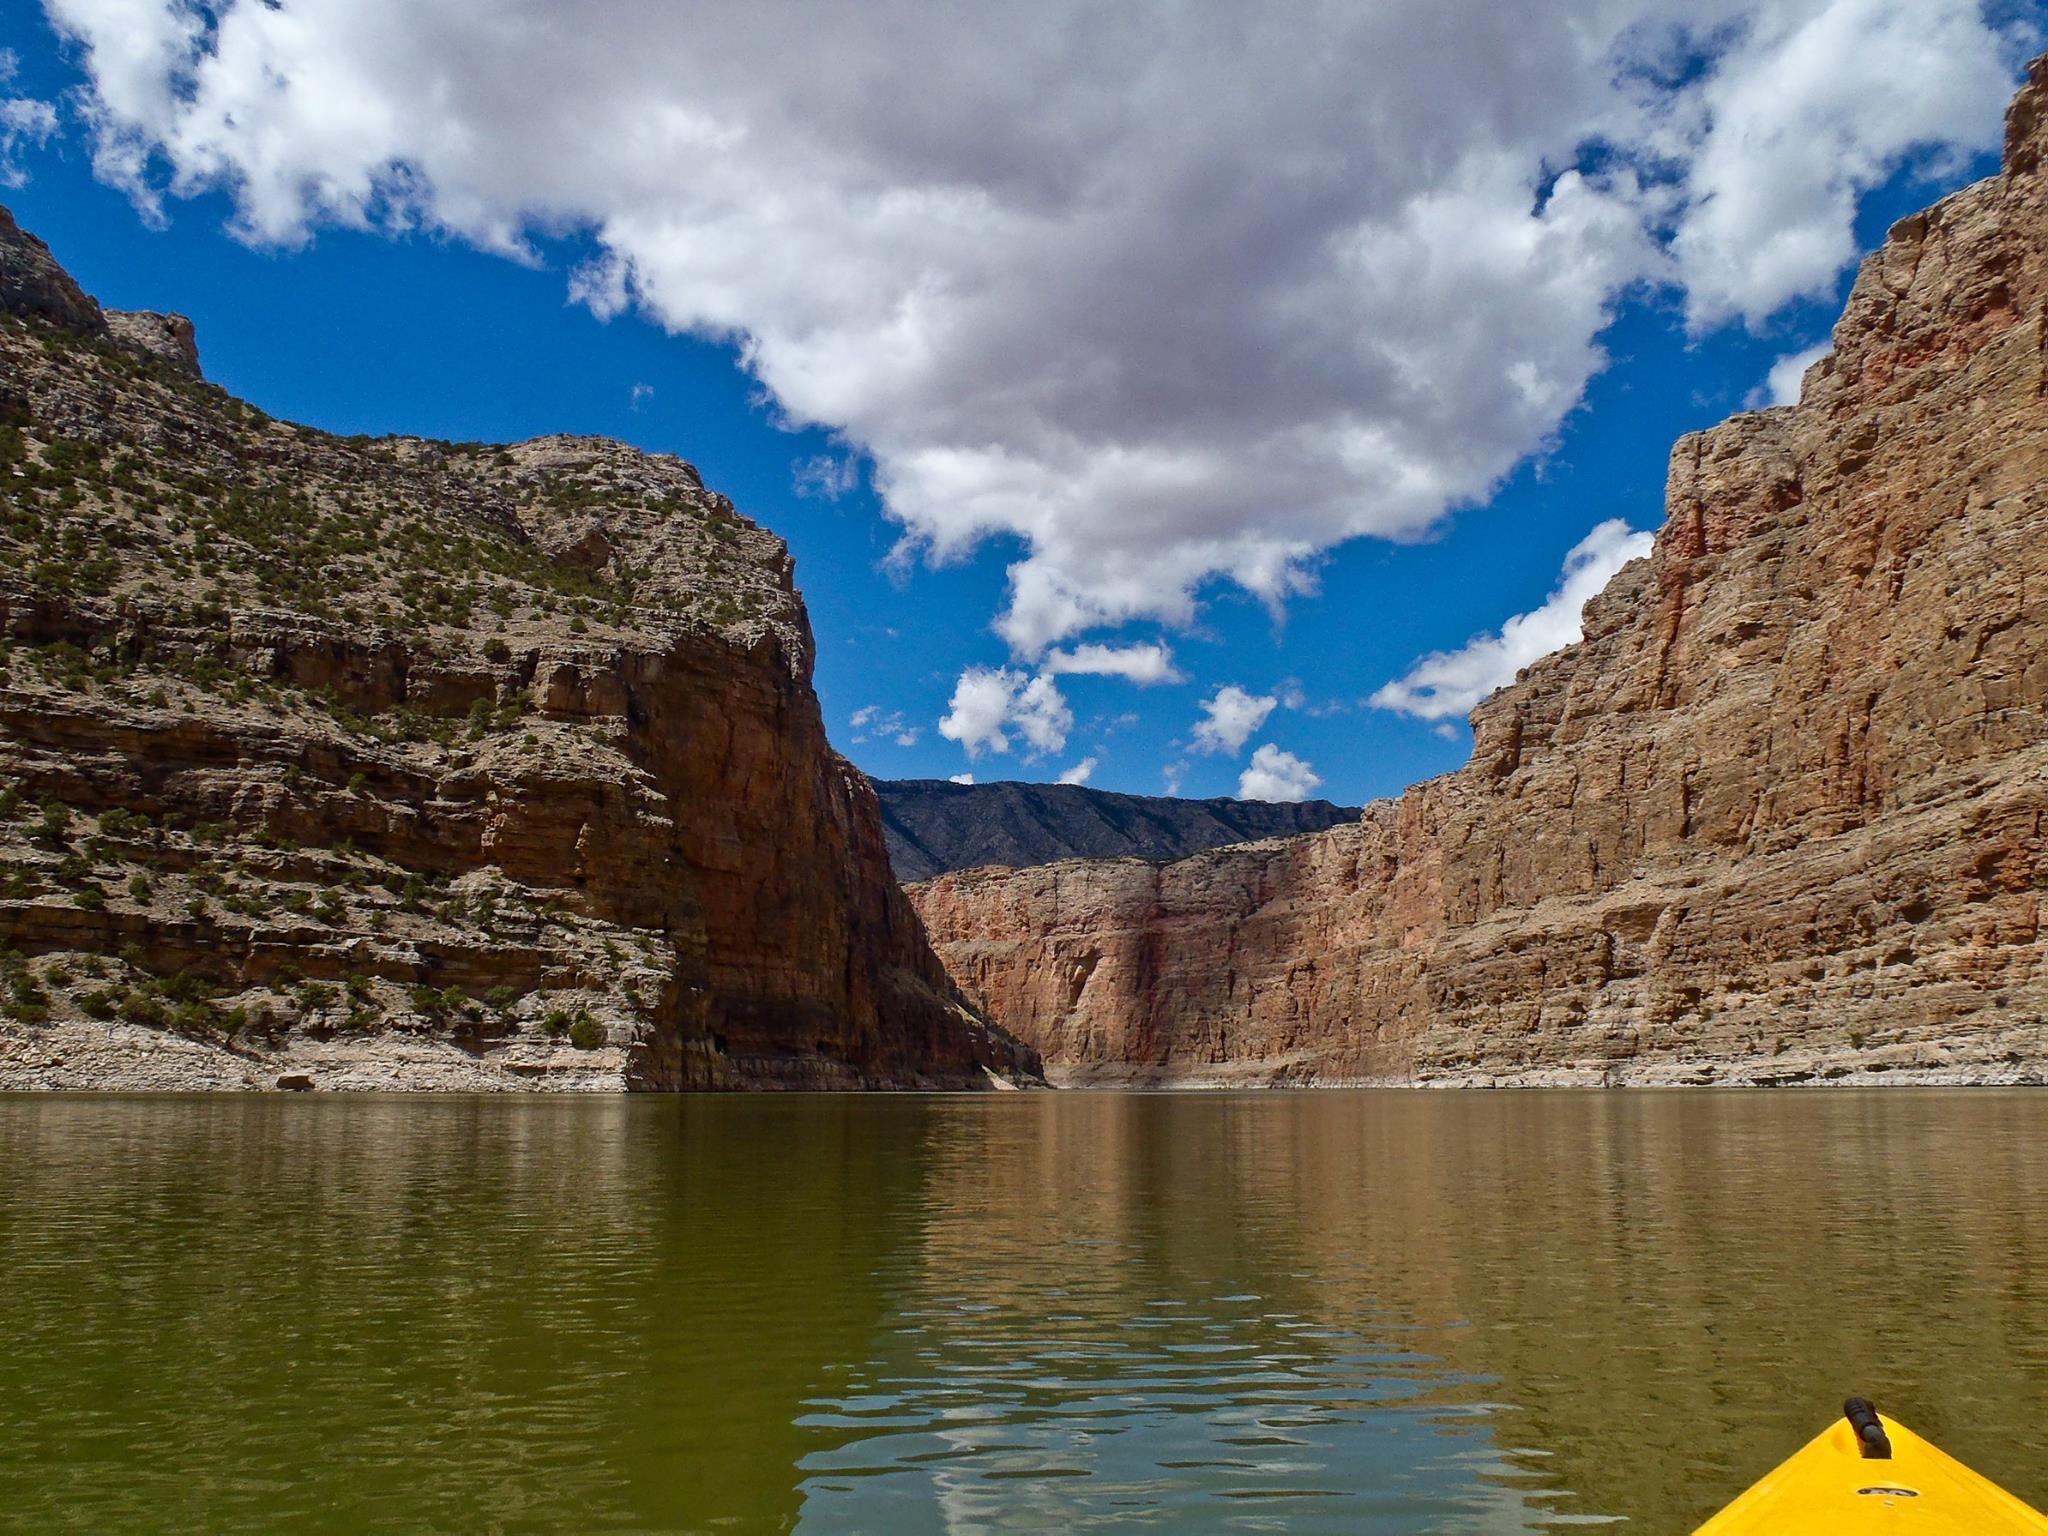 Boating - Bighorn Canyon National Recreation Area (U.S. National Park